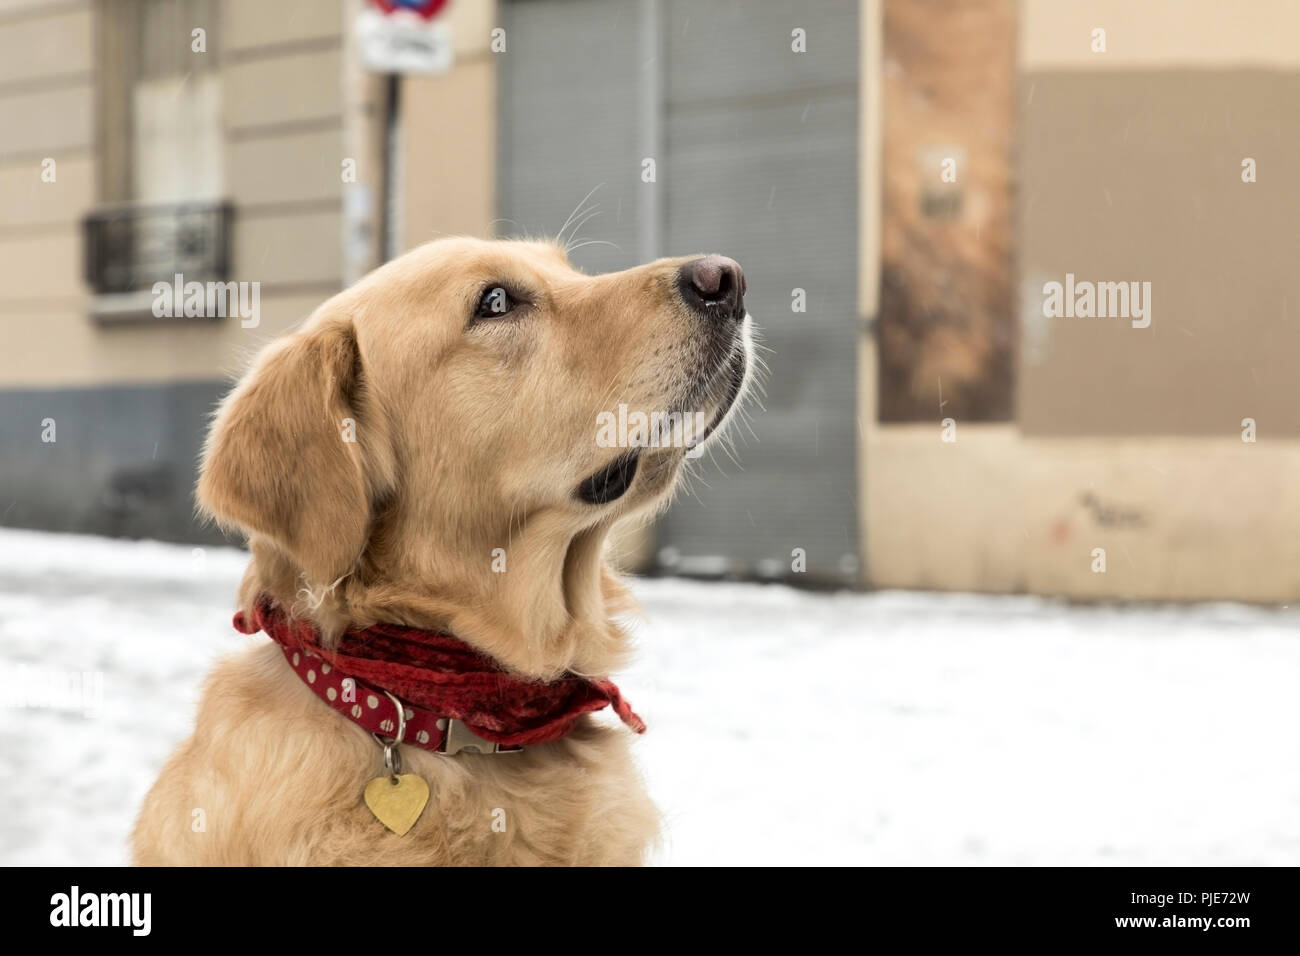 Golden retriever discovers snow for the first time. Stock Photo